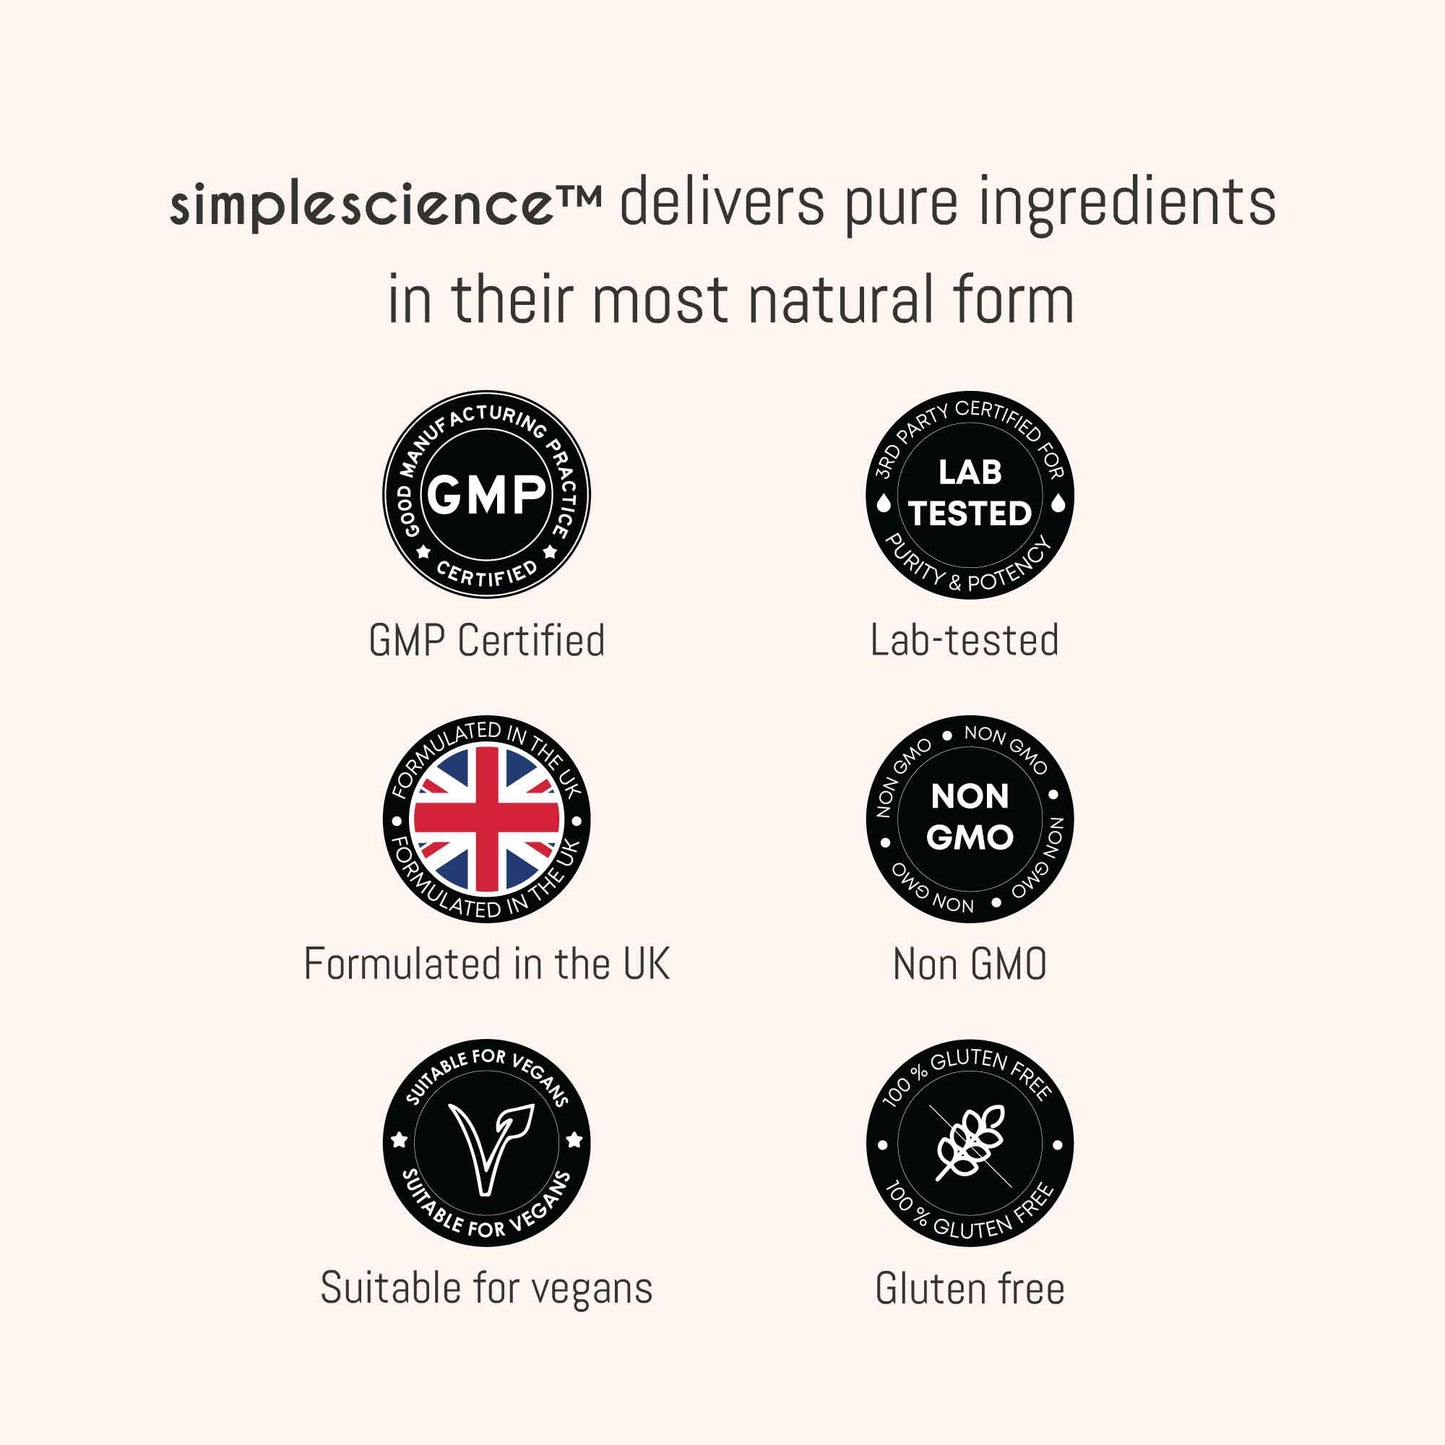 Simplescience offers the most advanced supplementation on the market, including premium sourcing, HACCP manufacture, GMP and GFSI standards, and cutting edge research.